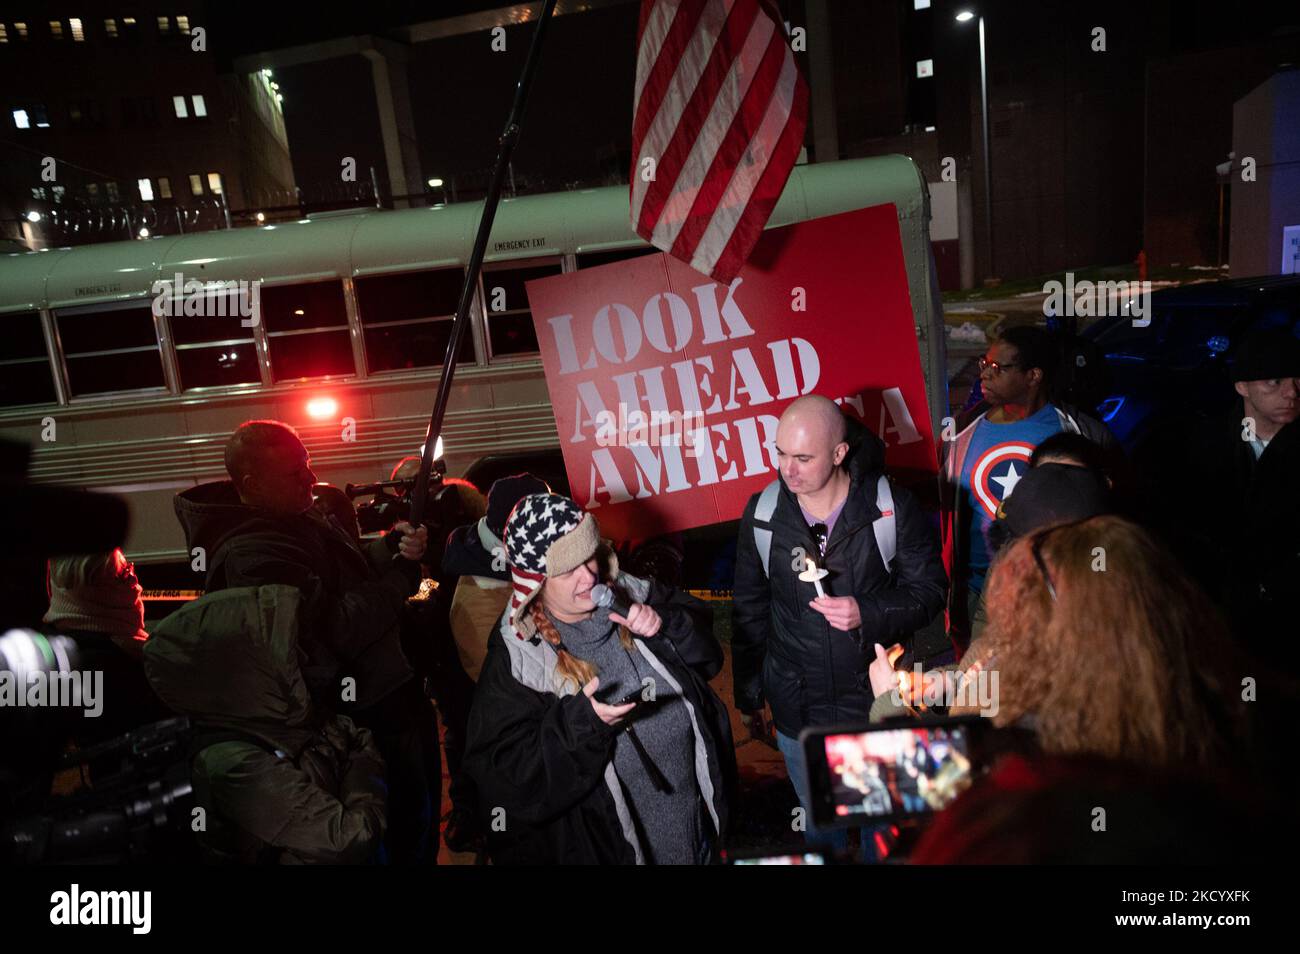 Matt Braynard's Look Ahead America holds vigil with Ashli Babbitt's mother at DC Jail calling for the freeing of the 'political prisoners' of the January 6th insurrection, on January 6th, 2022. (Photo by Zach D Roberts/NurPhoto) Stock Photo